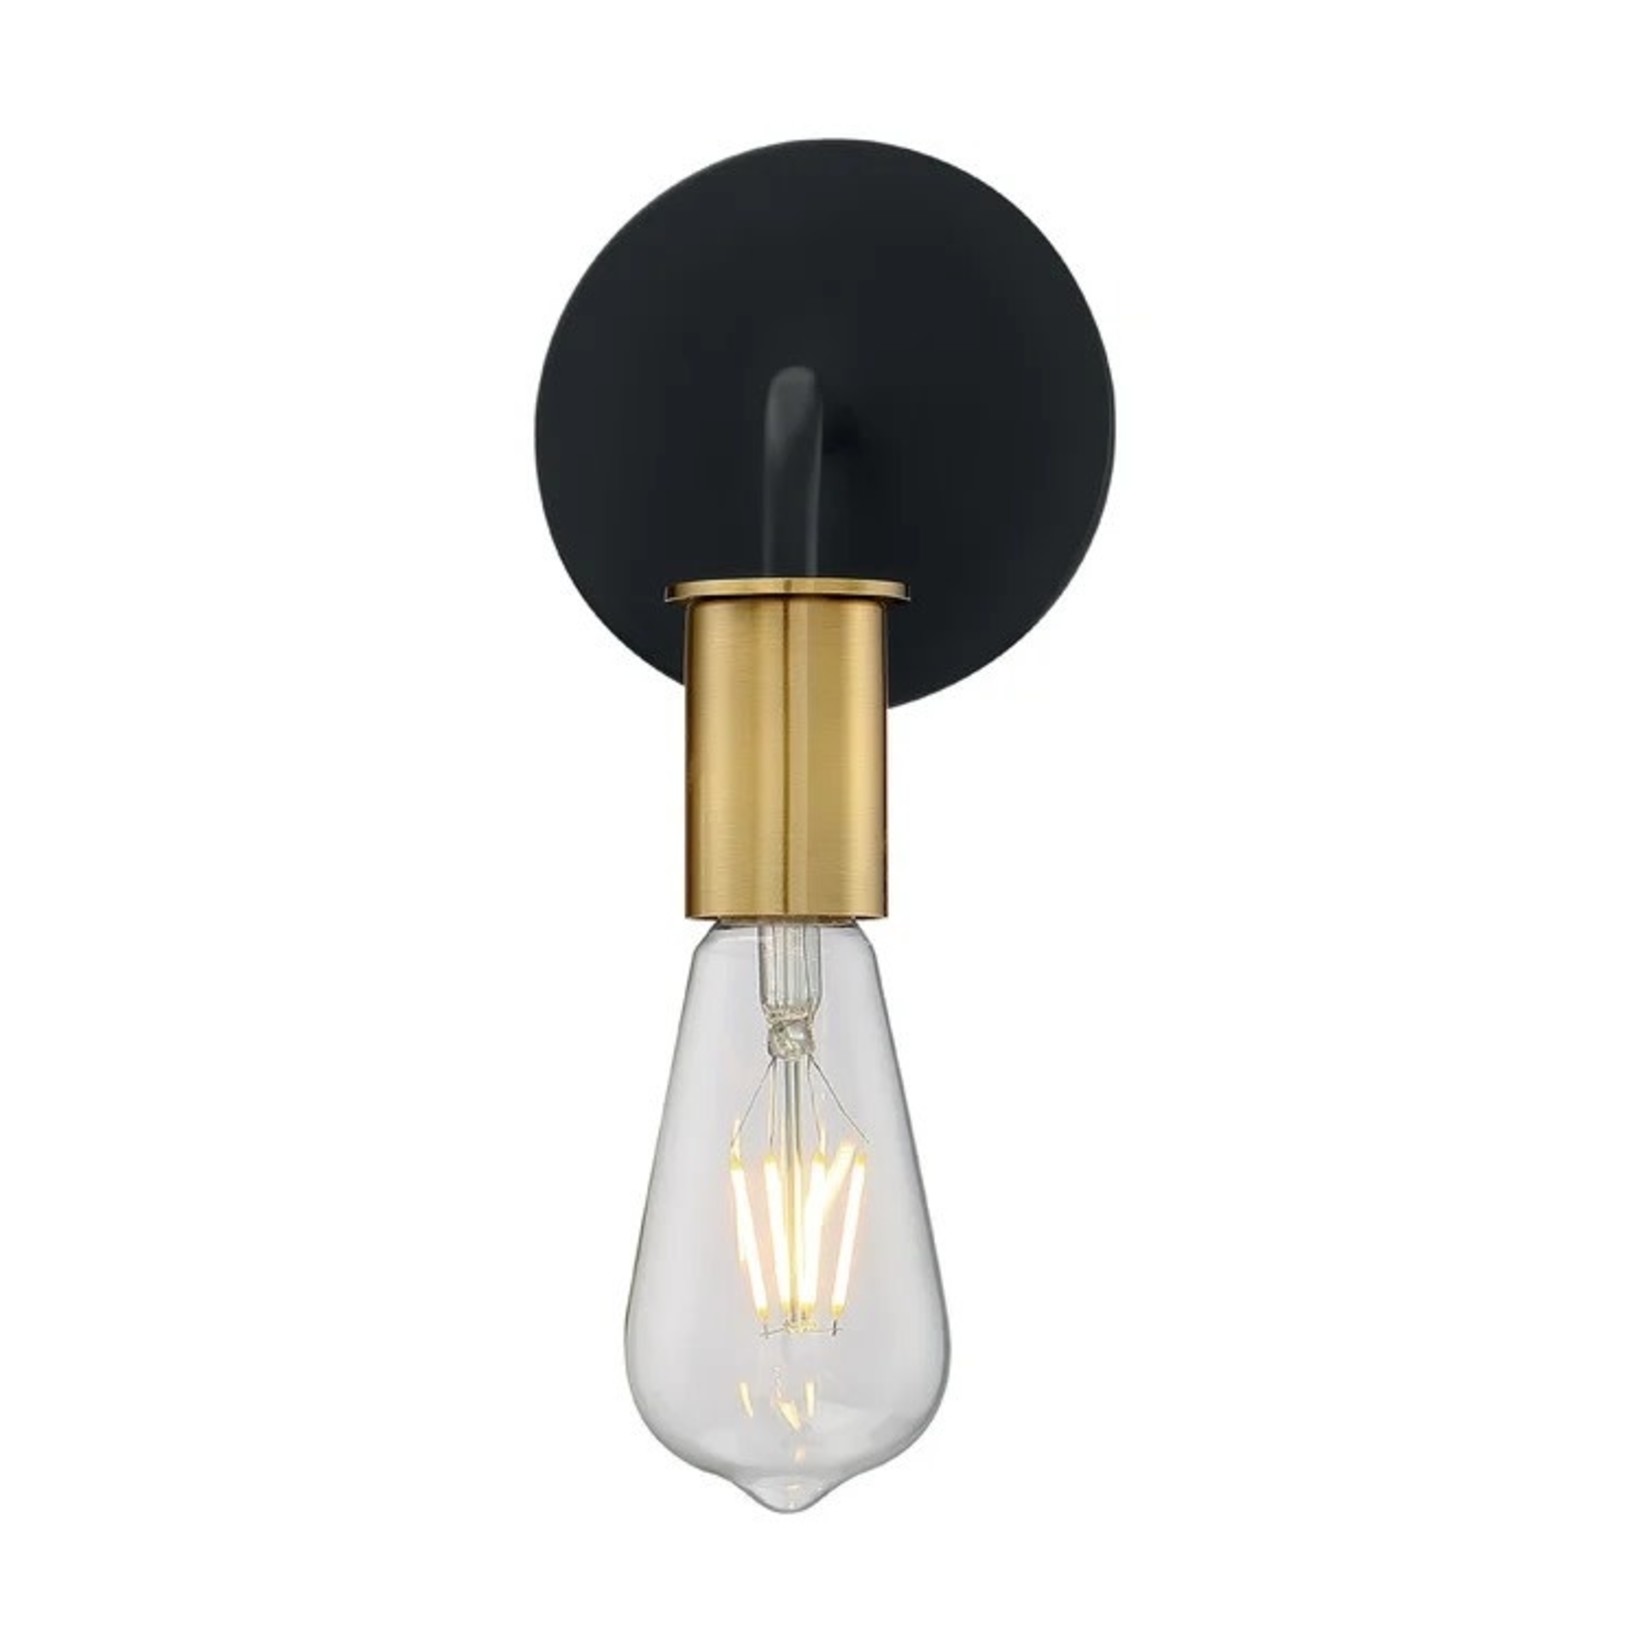 *Riaz 1-Light Dimmable Bath Sconce - Black/Brushed Brass